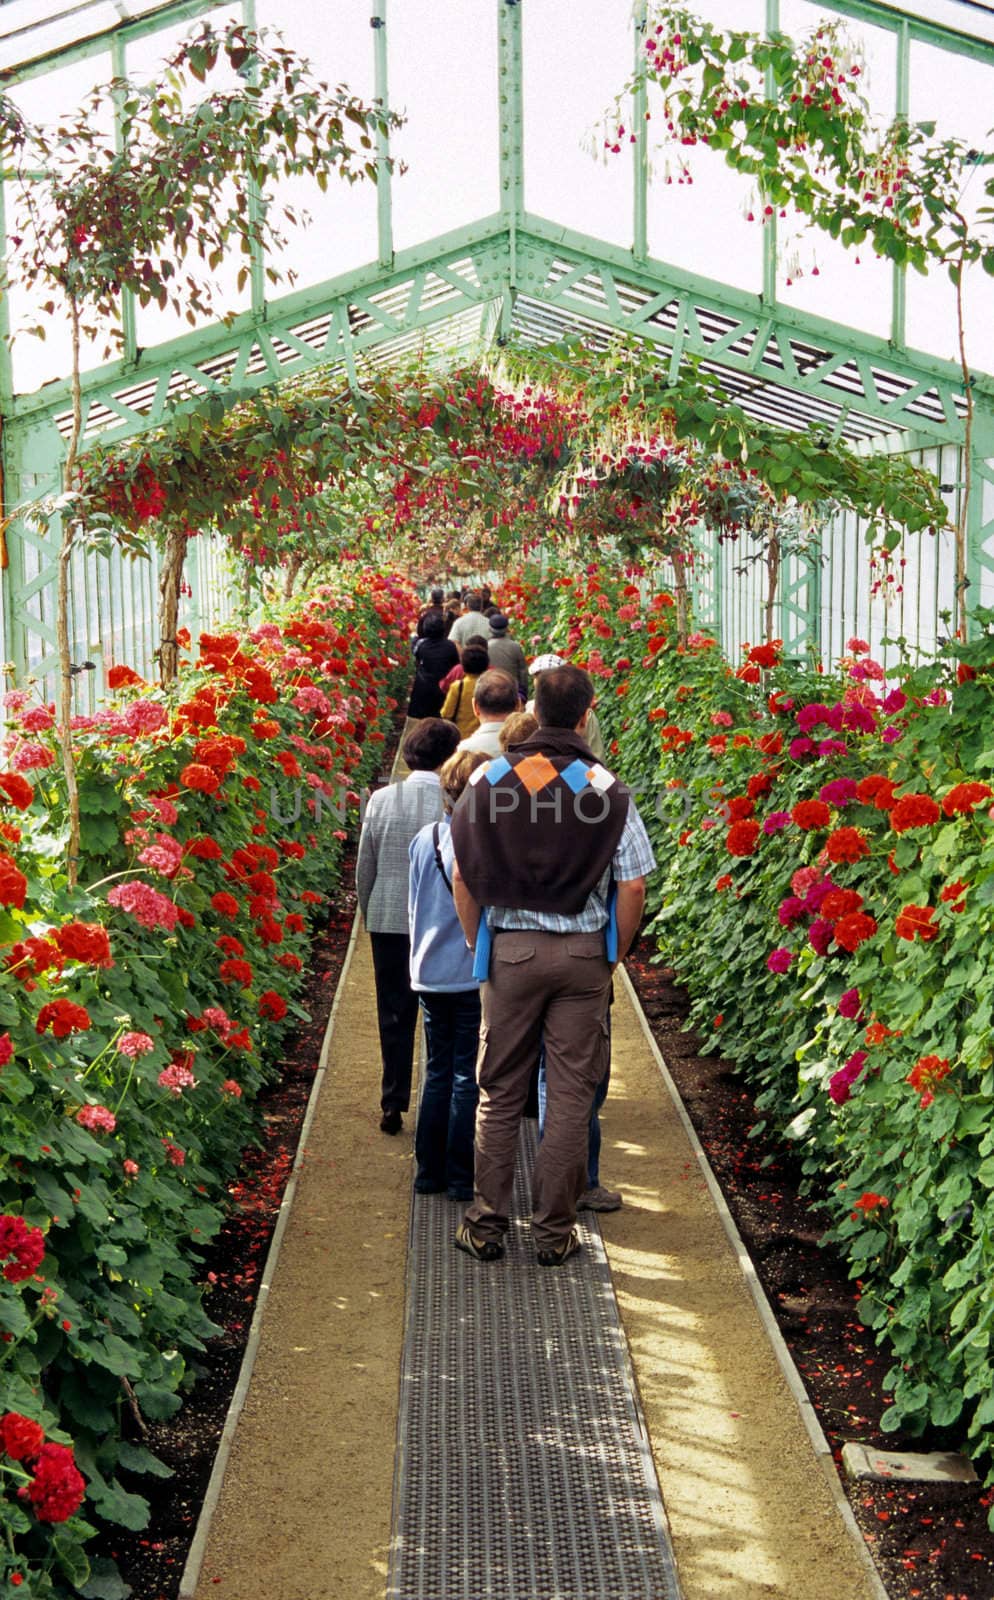 Tourists visit the Royal Greenhouses in Laeken, Belgium where they can view geraniums and fuschias in profusion.